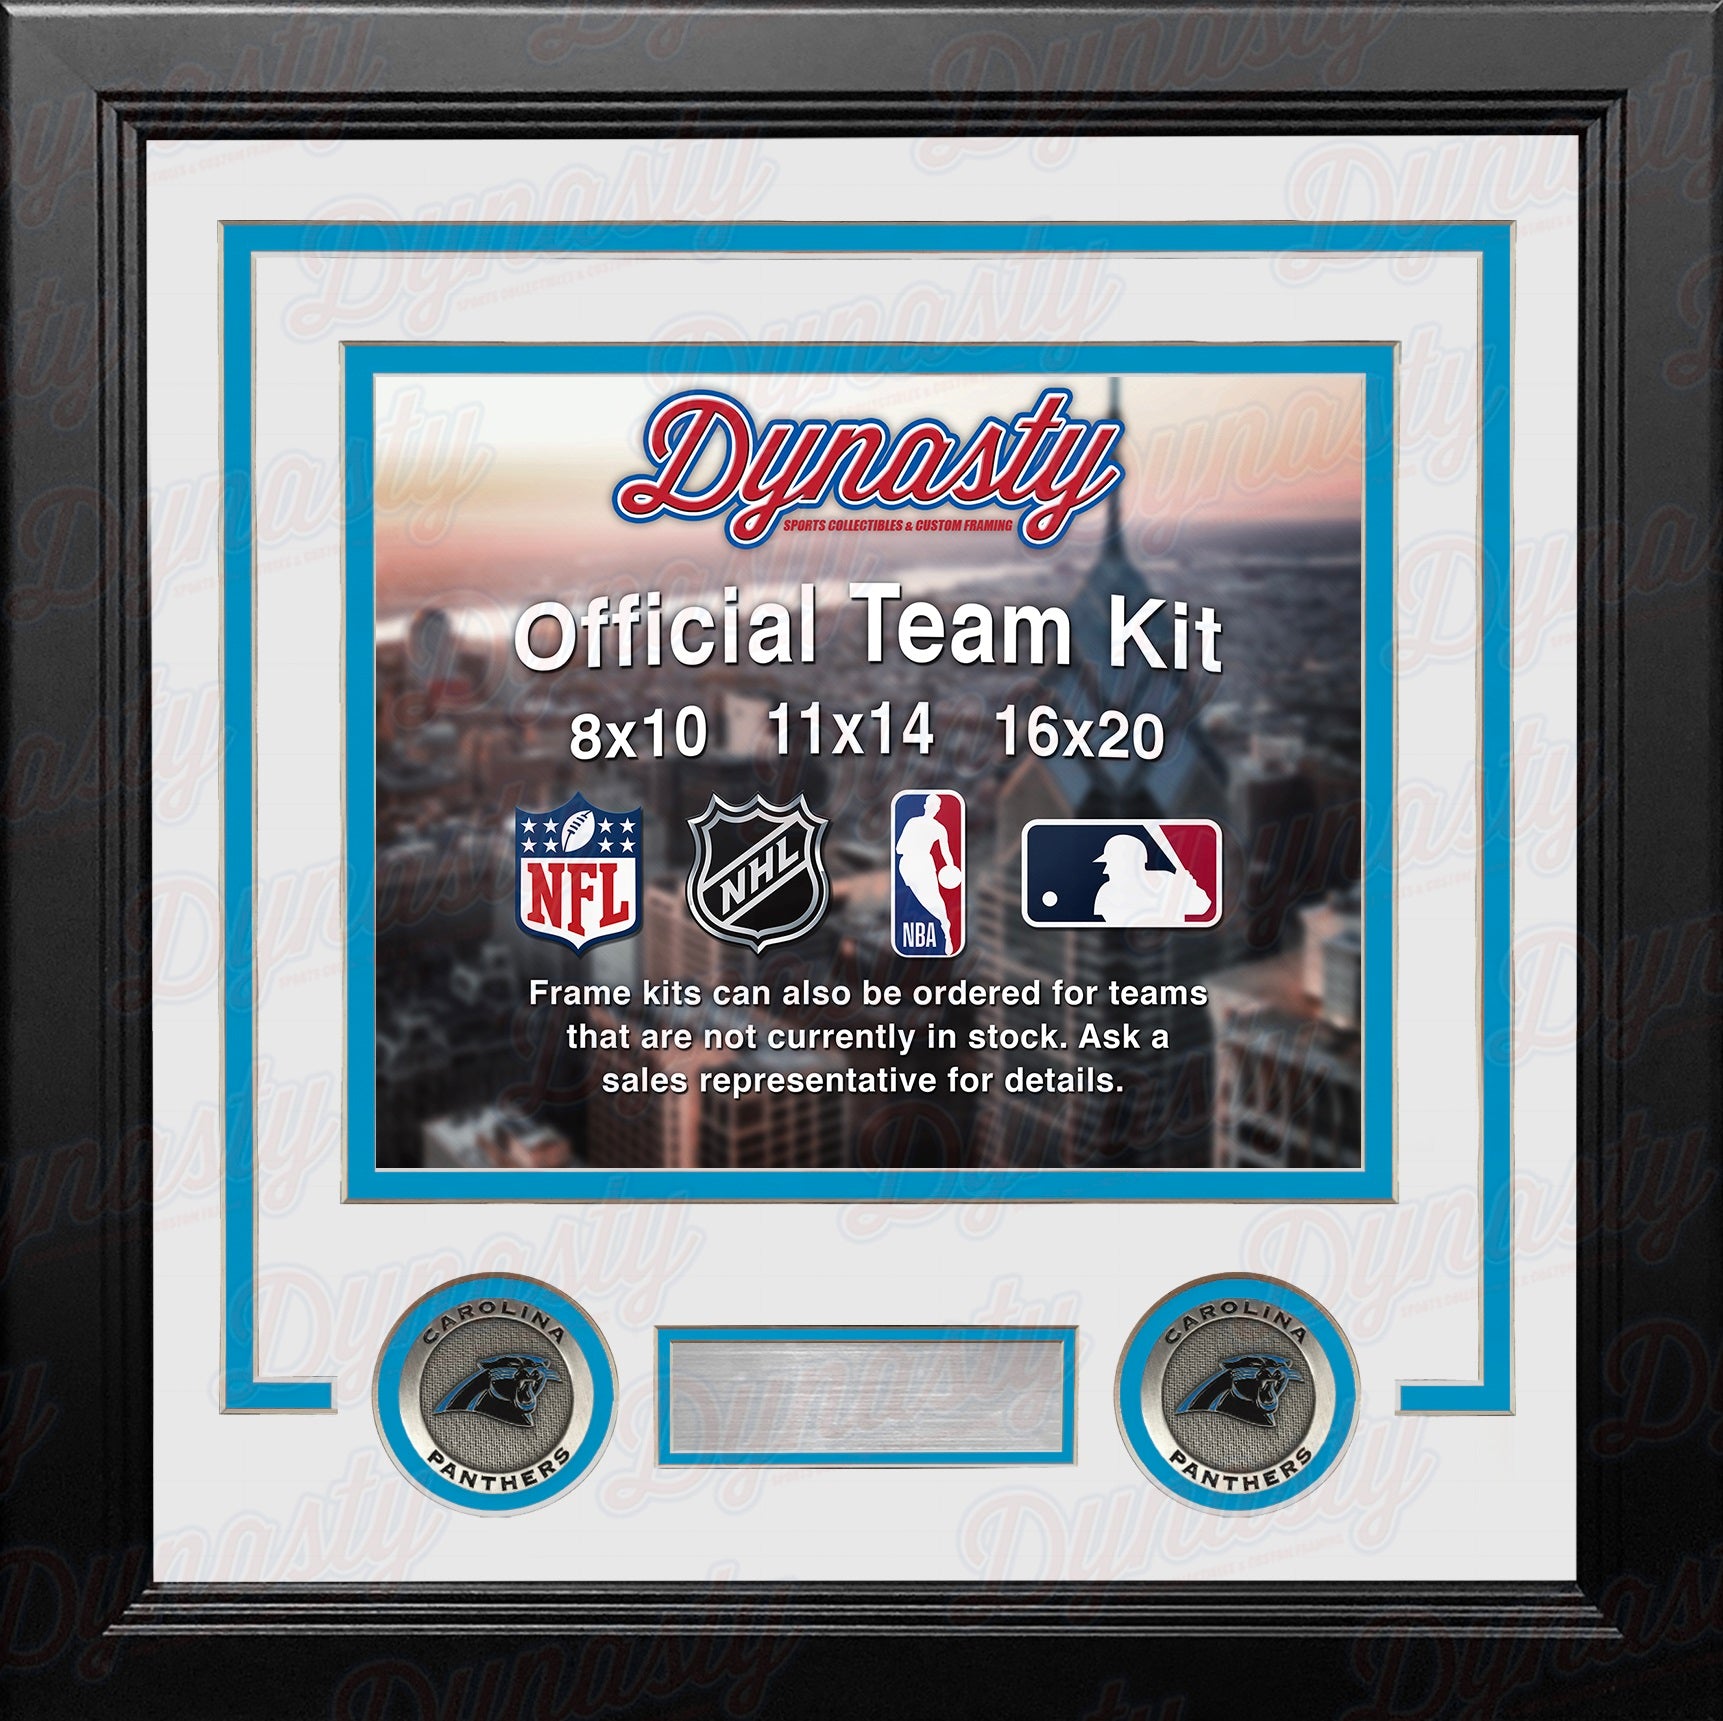 Carolina Panthers Custom NFL Football 11x14 Picture Frame Kit (Multiple Colors) - Dynasty Sports & Framing 